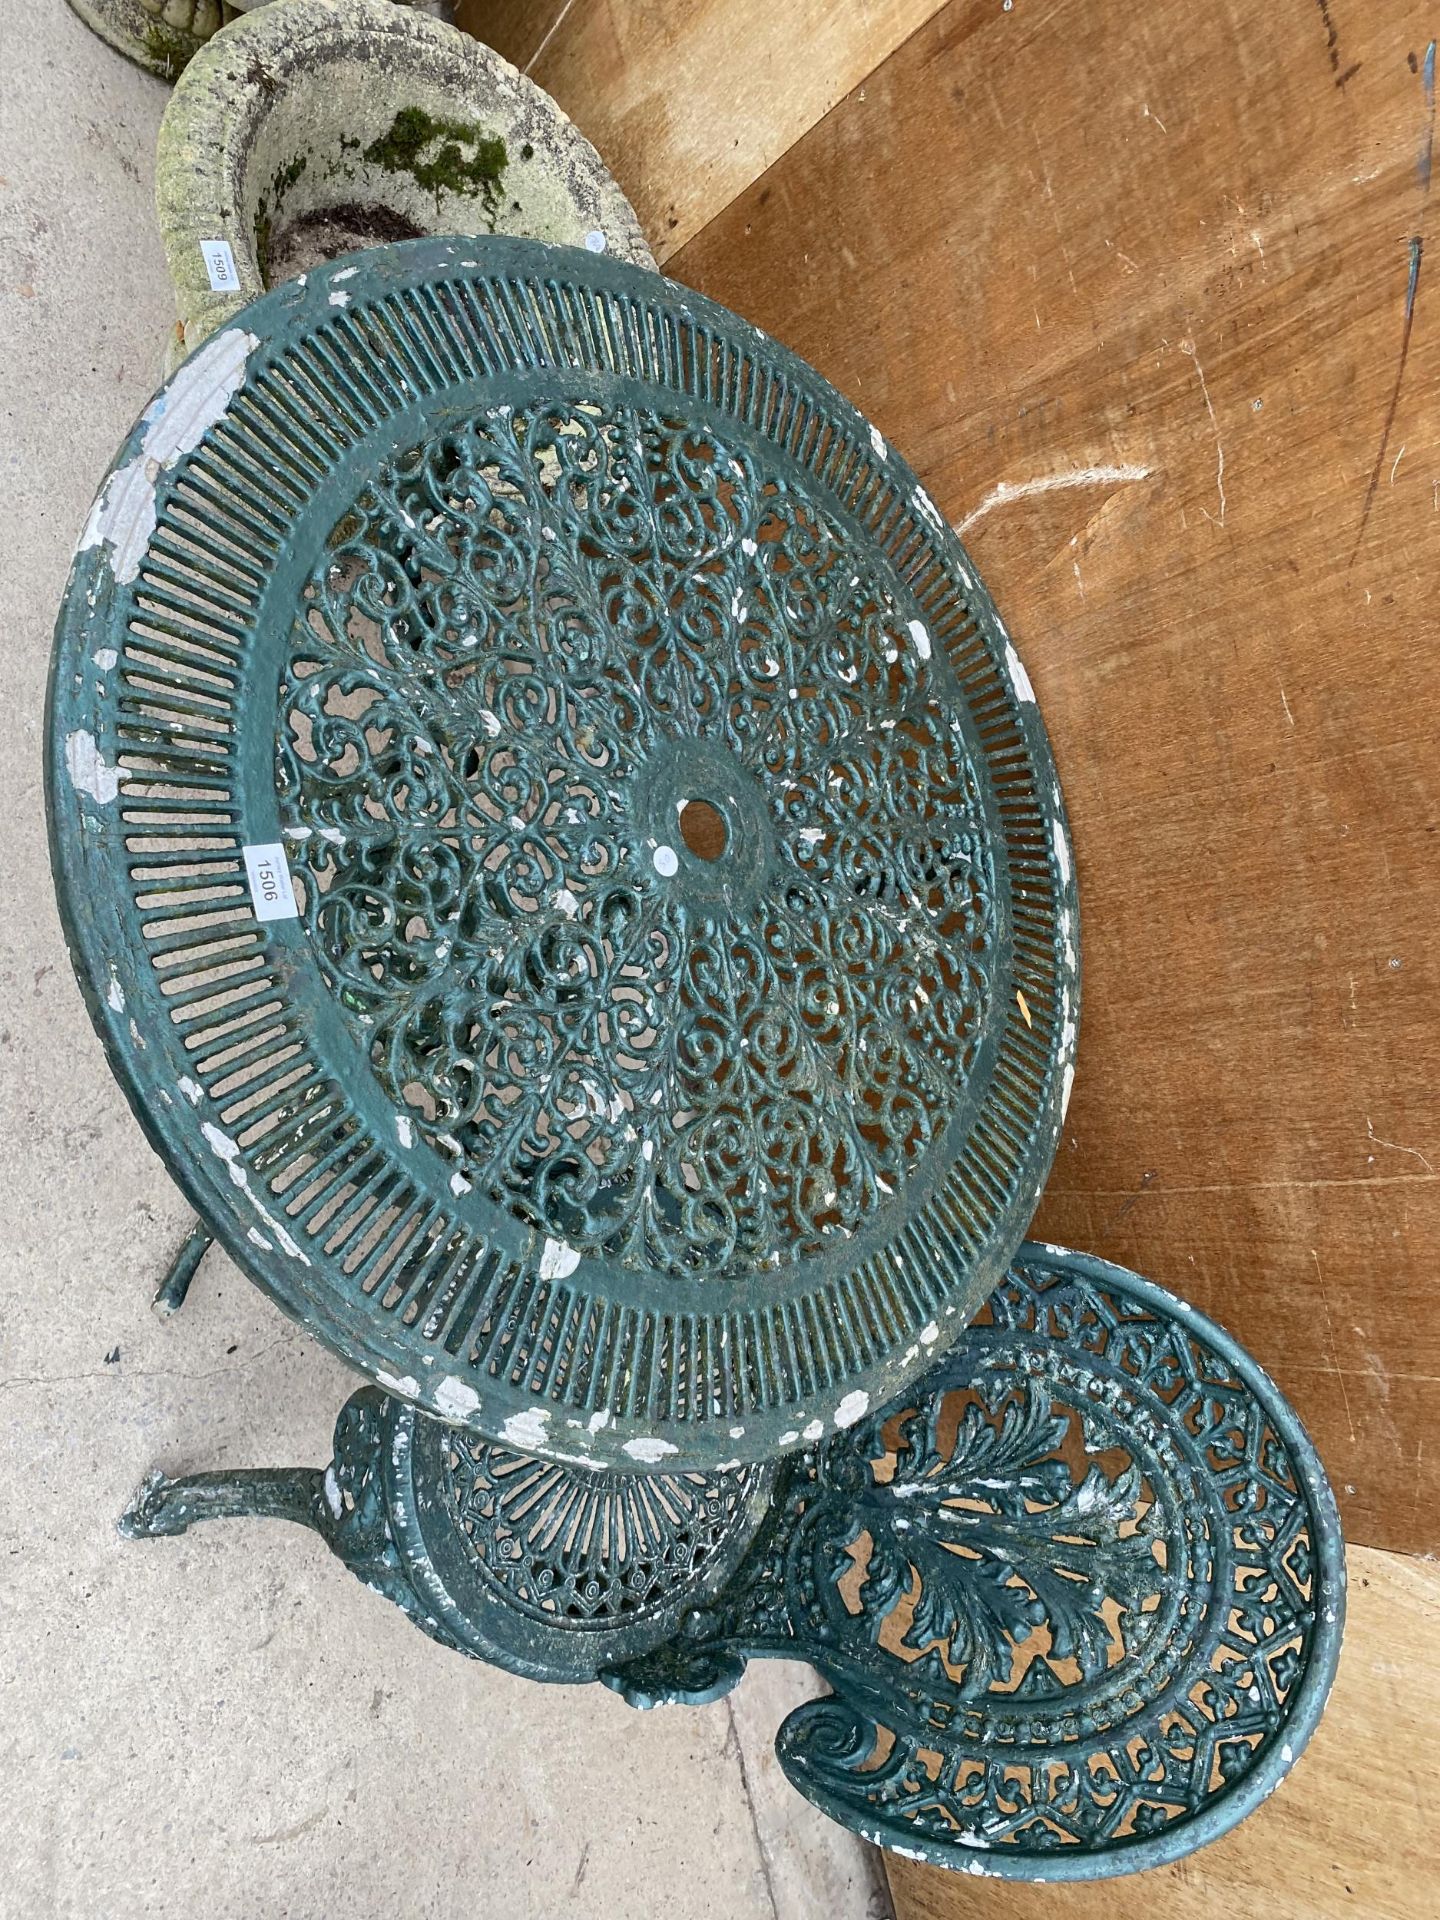 A CAST ALLOY BISTRO SET COMPRISING OF A ROUND TABLE AND ONE CHAIR - Image 2 of 2